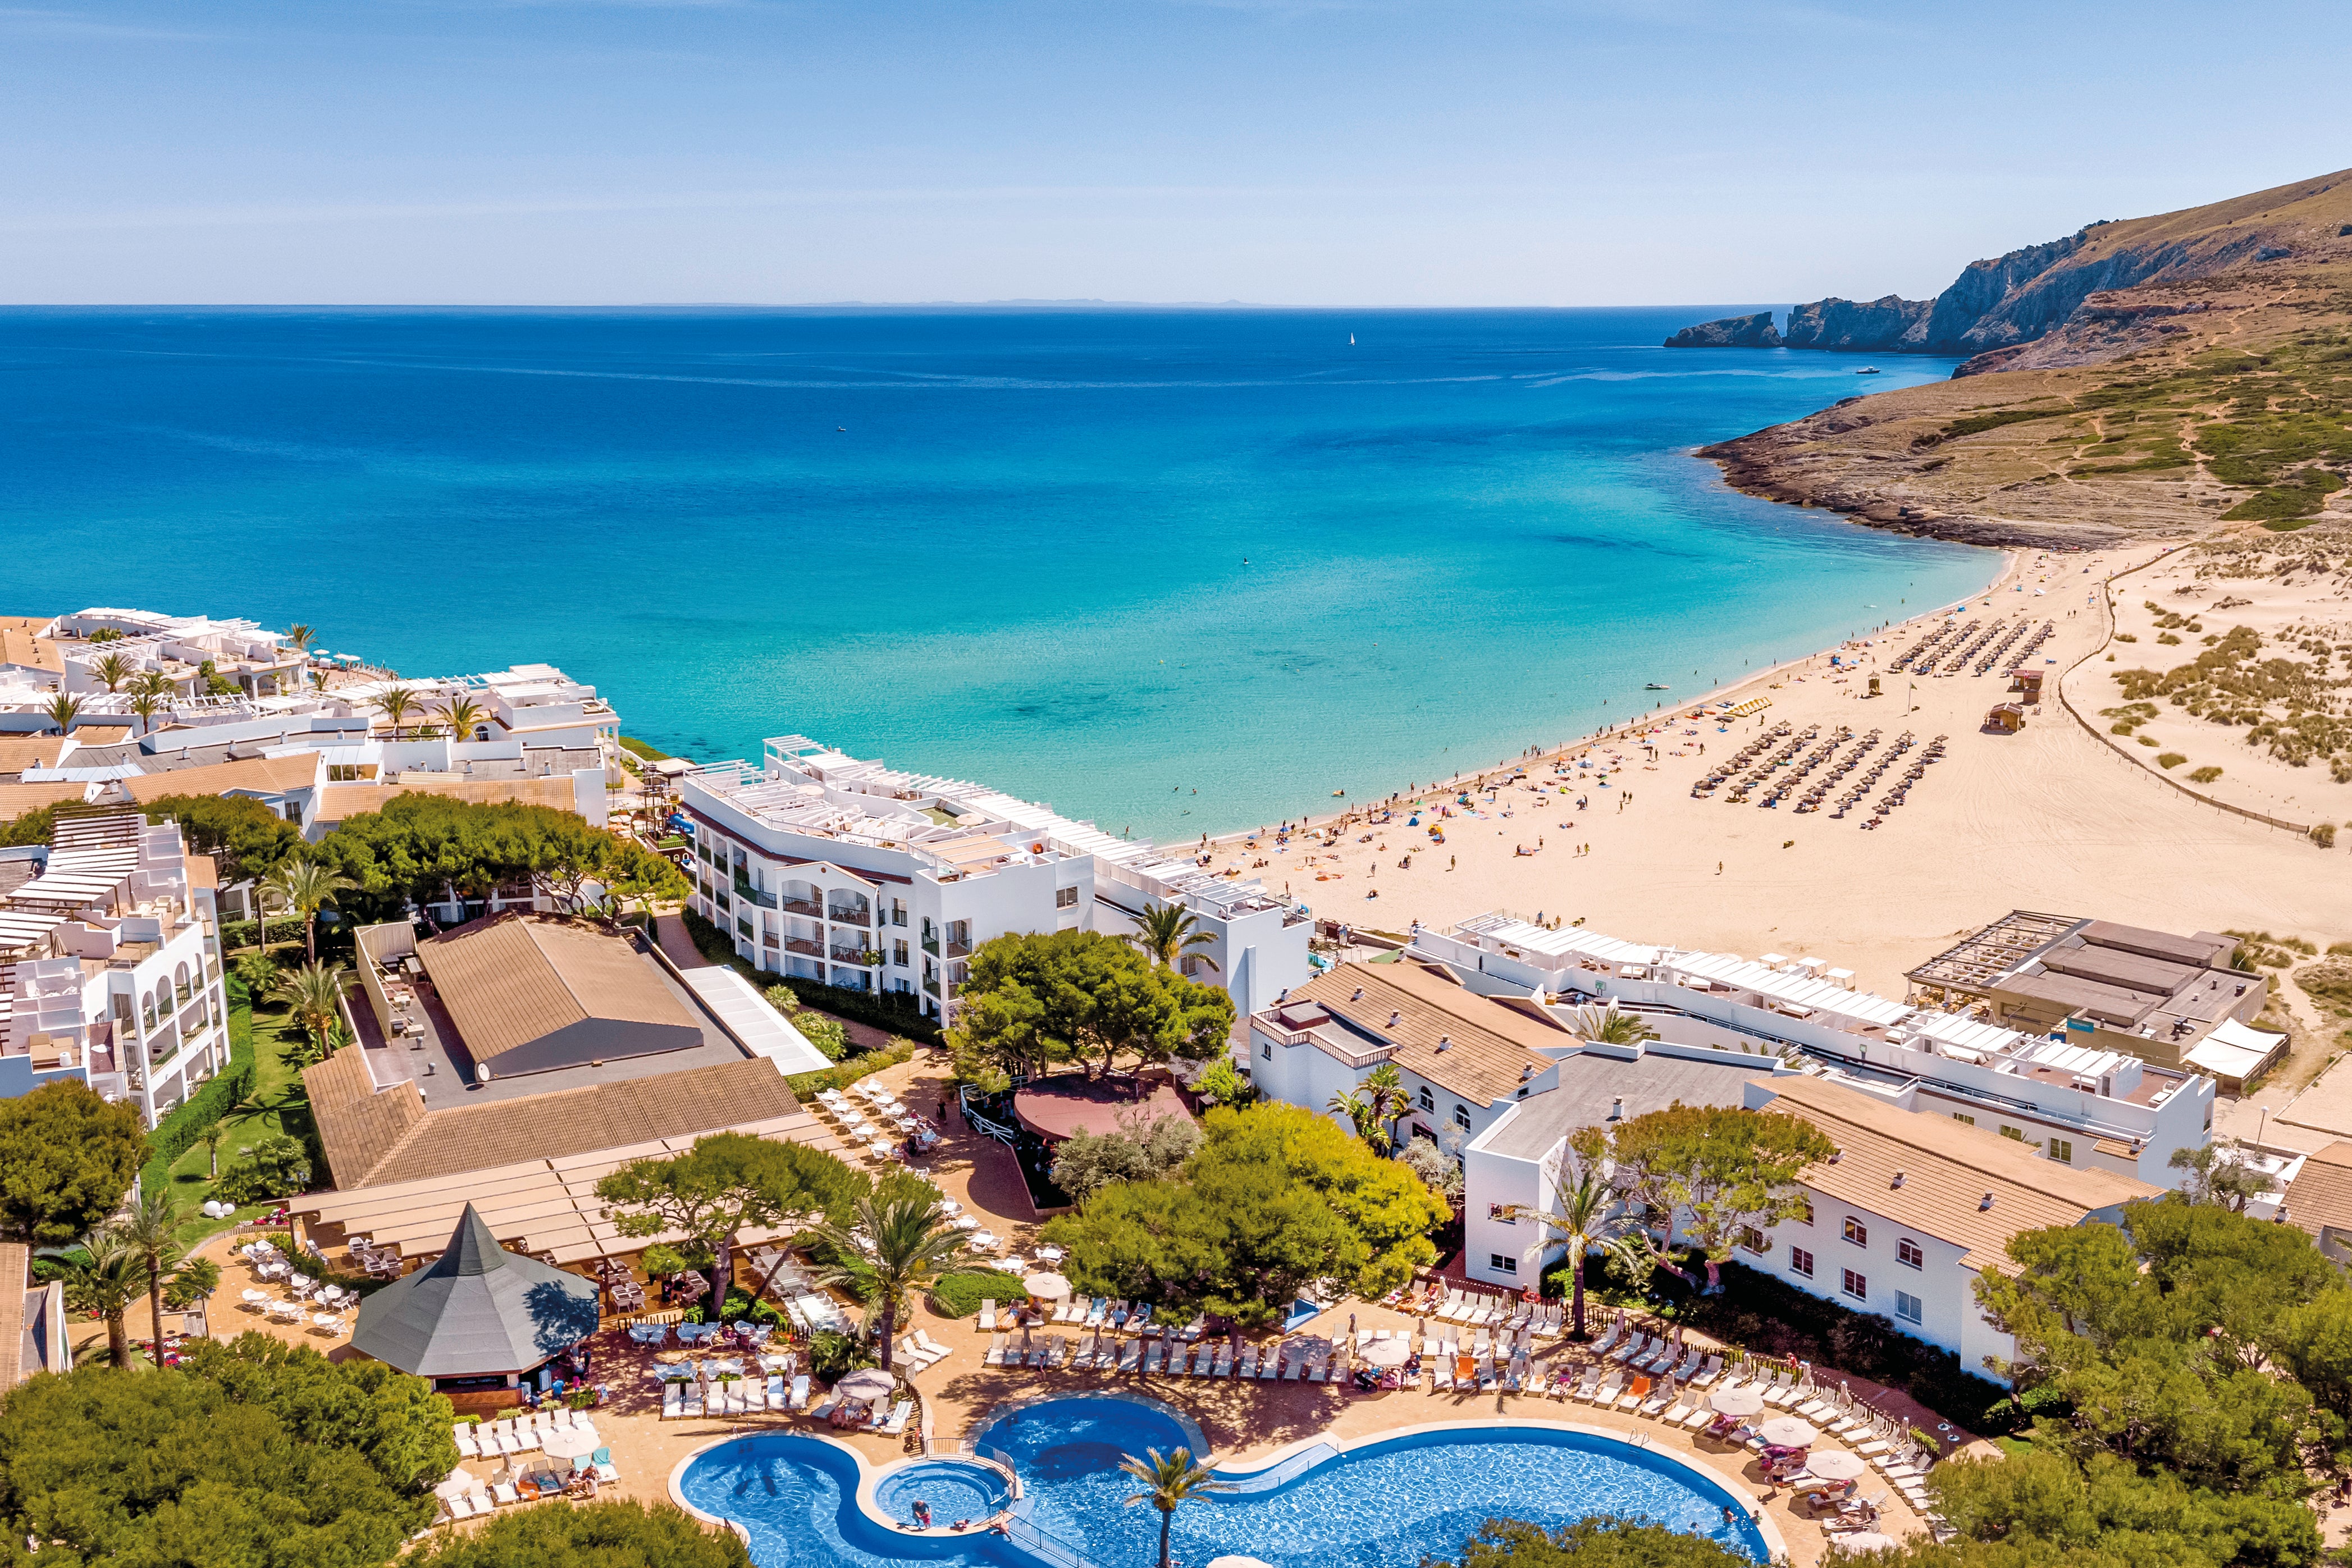 There’s an abundance of natural beauty in the Balearics – a stay at Majorca’s VIVA Cala Mesquida Resort and Spa makes the perfect base to explore